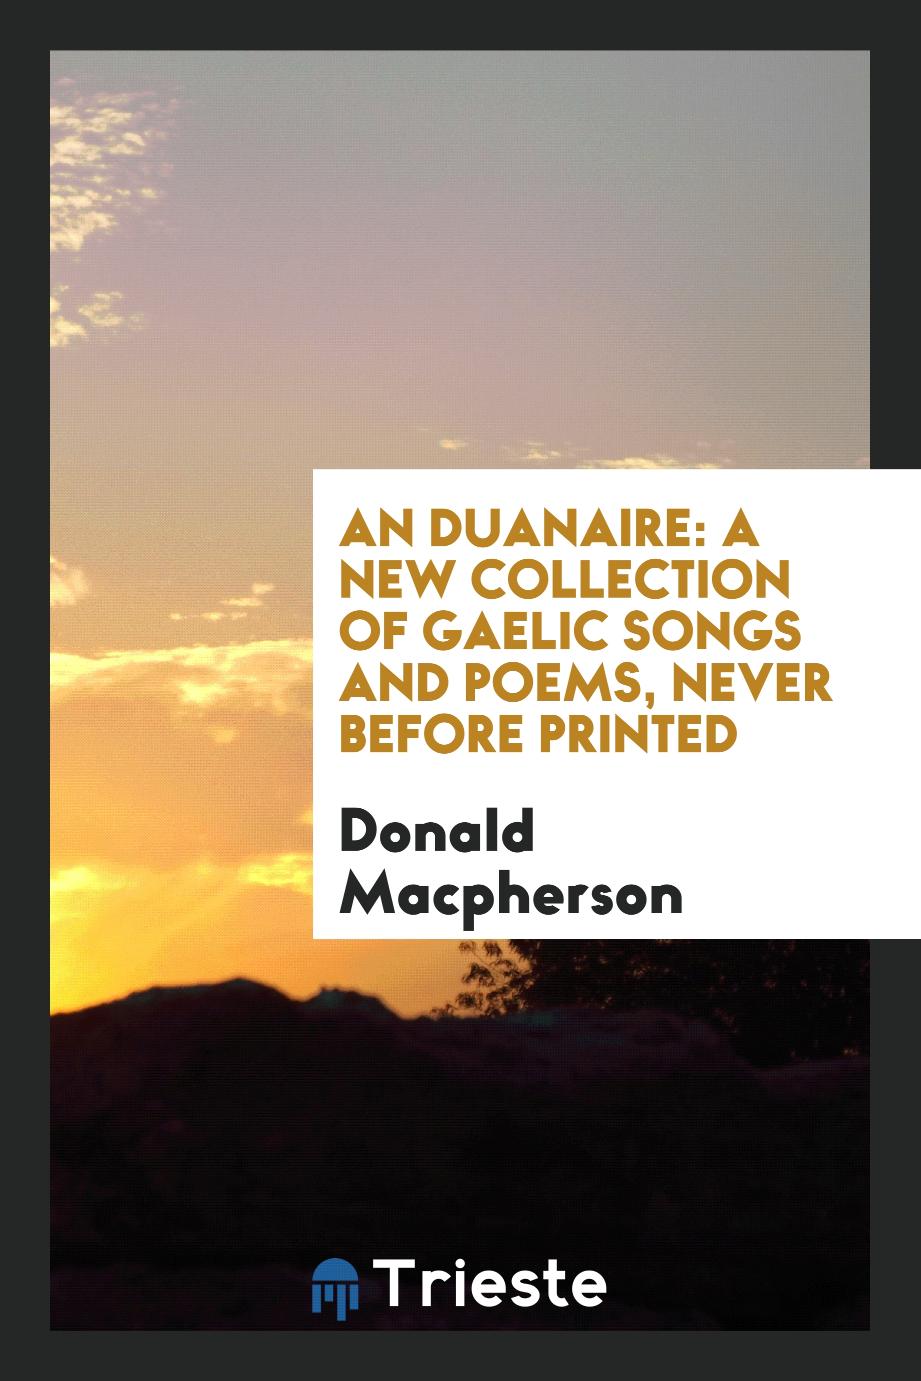 An duanaire: a new collection of gaelic songs and poems, never before printed